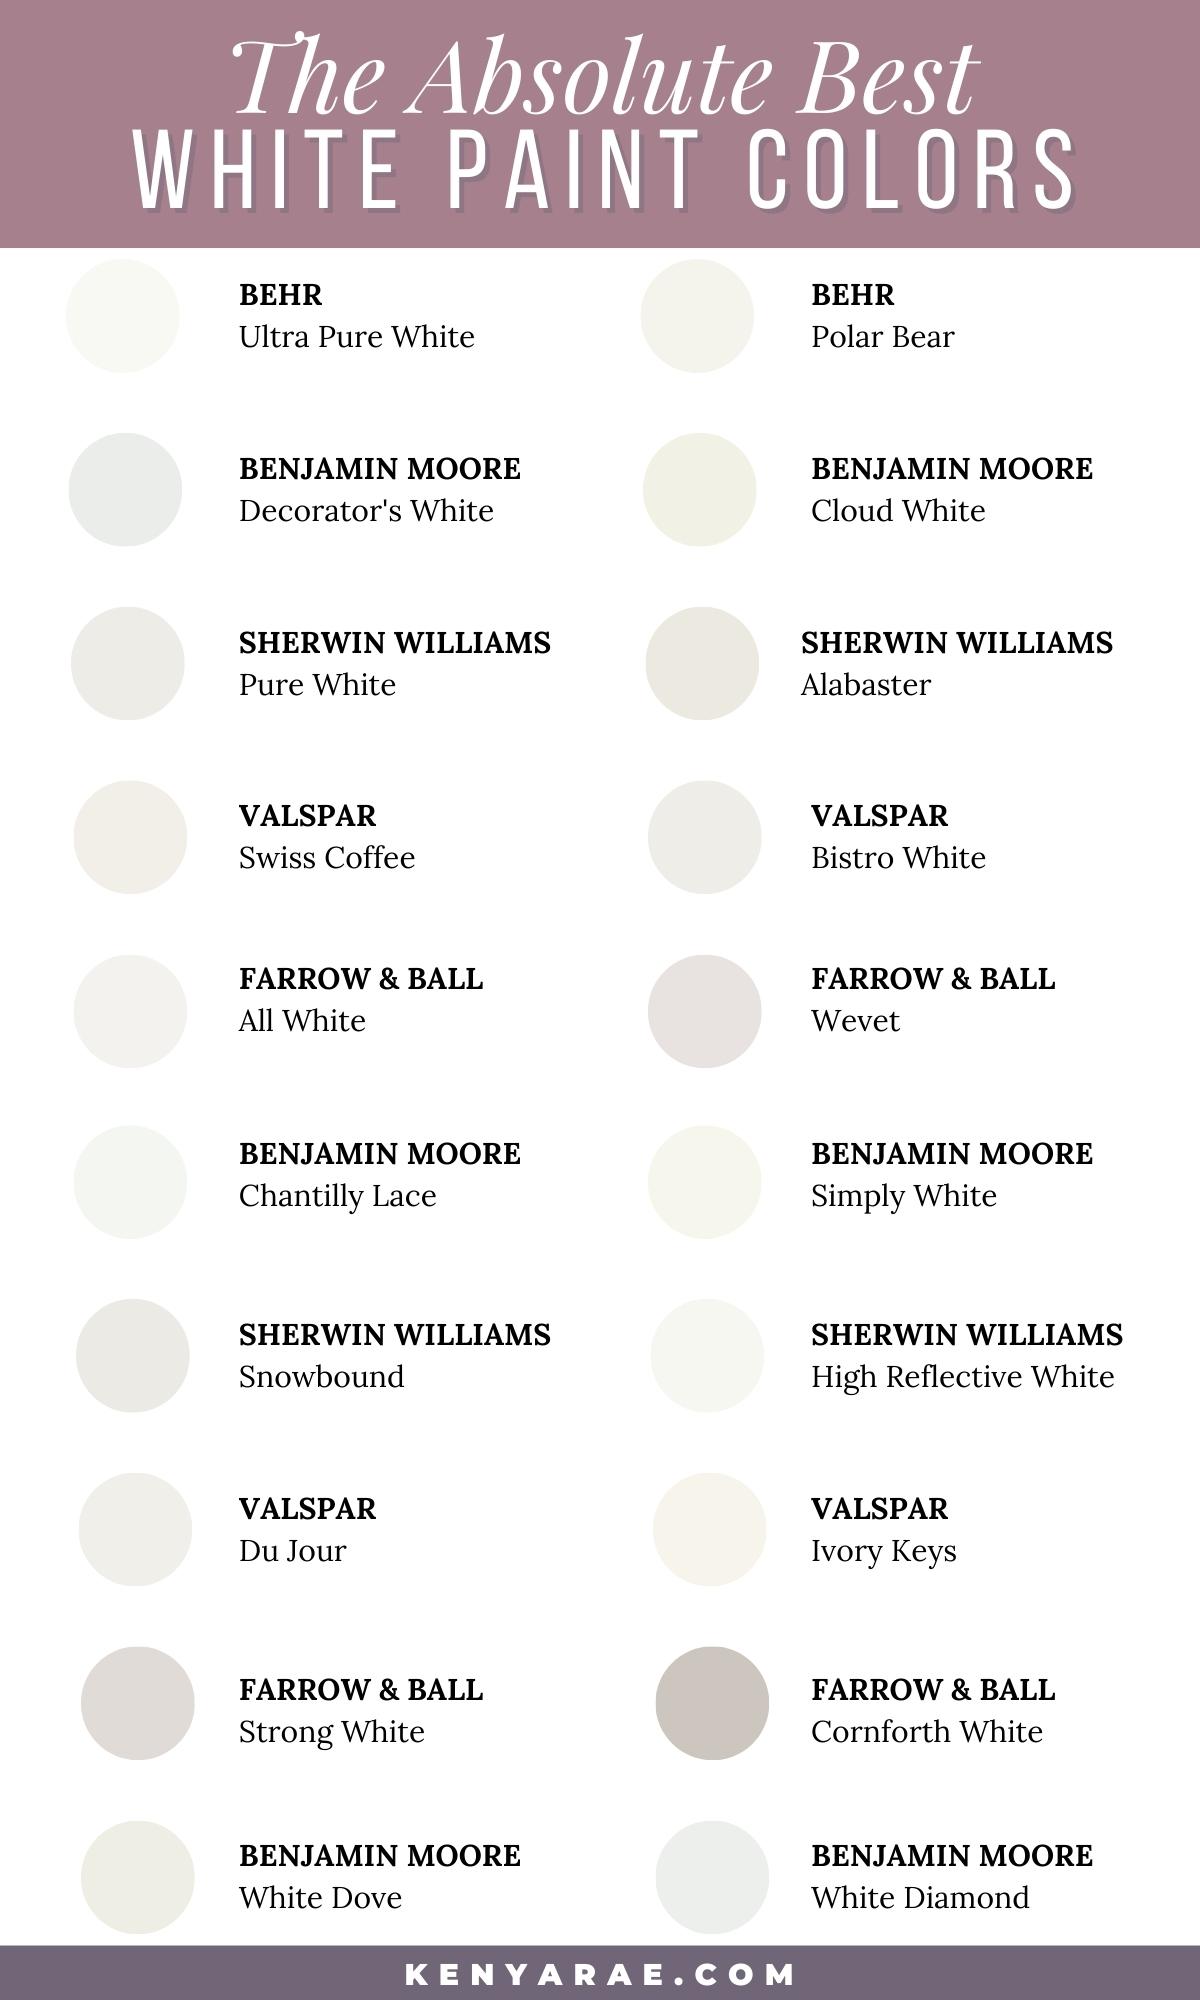 The absolute best white paint colors